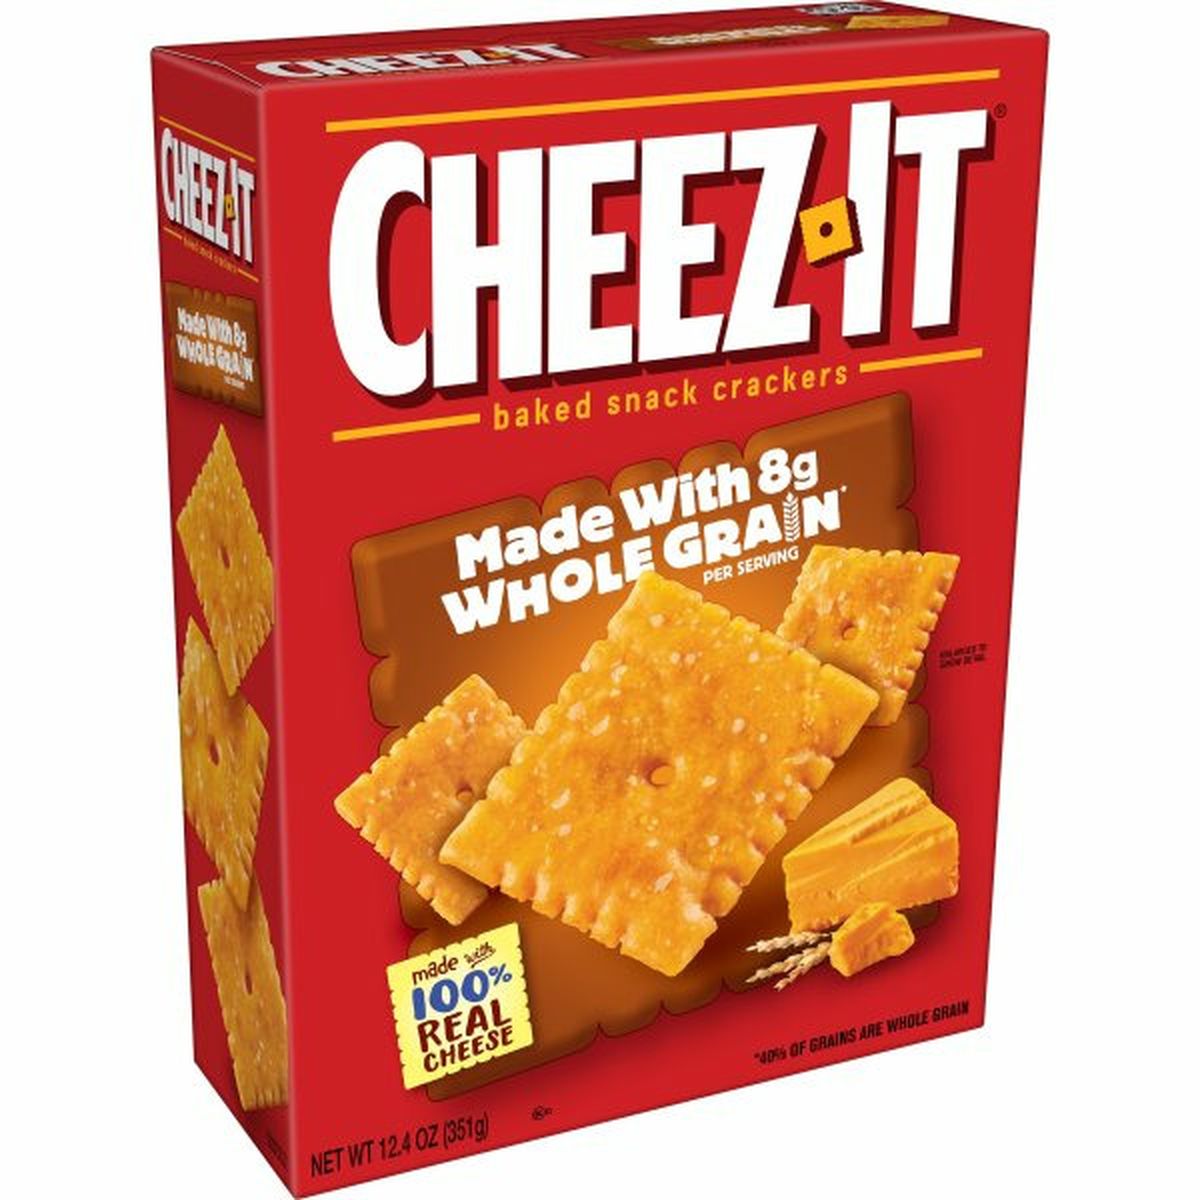 Calories in Cheez-It Crackers Cheez-It Baked Snack Cheese Crackers, Made with Whole Grain, Made with 100% Real Cheese, 12.4oz